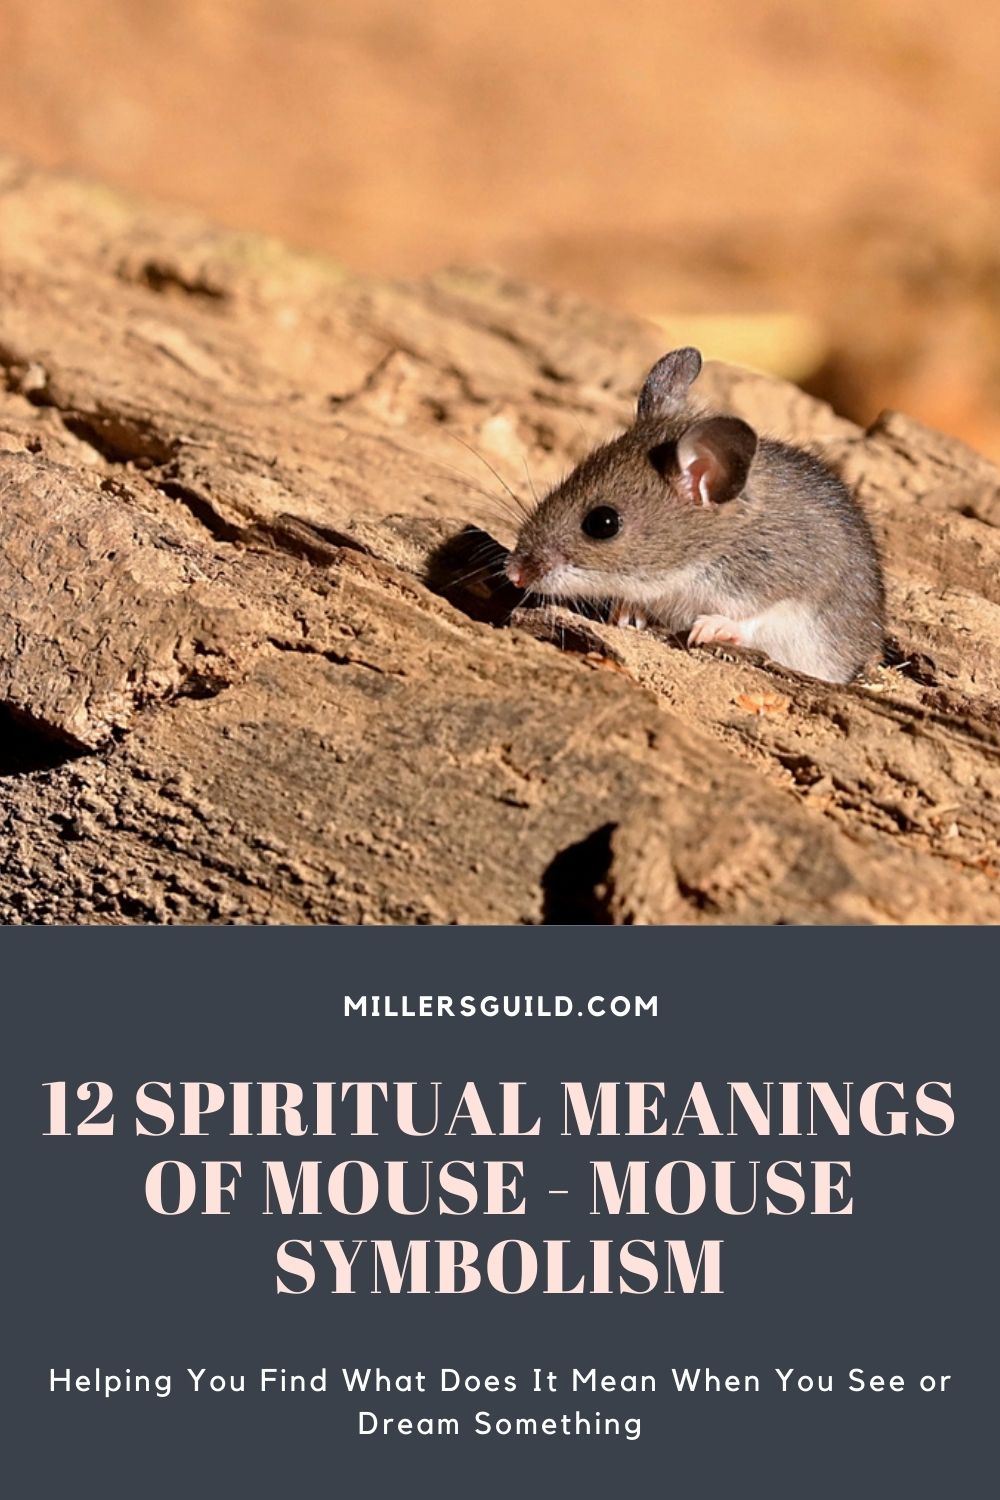 12 Spiritual Meanings of Mouse - Mouse Symbolism 2